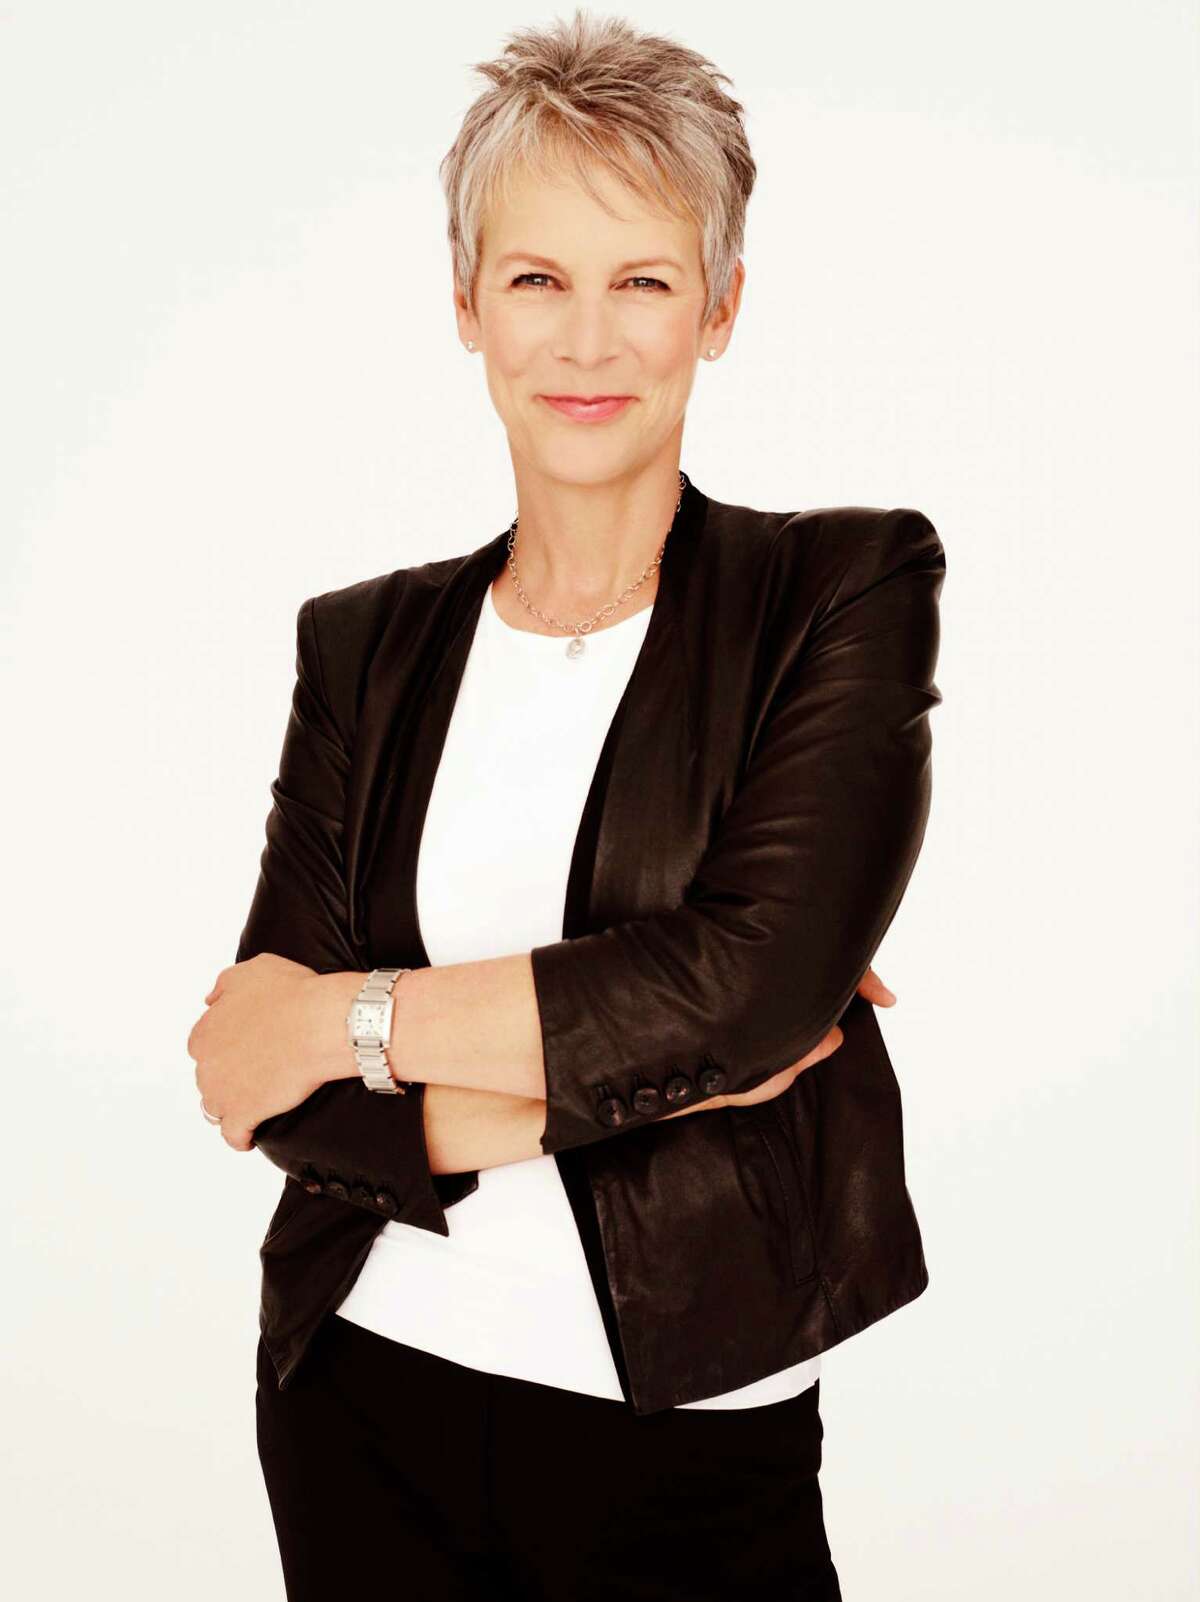 Jamie Lee Curtis knows a thing or two about firsts